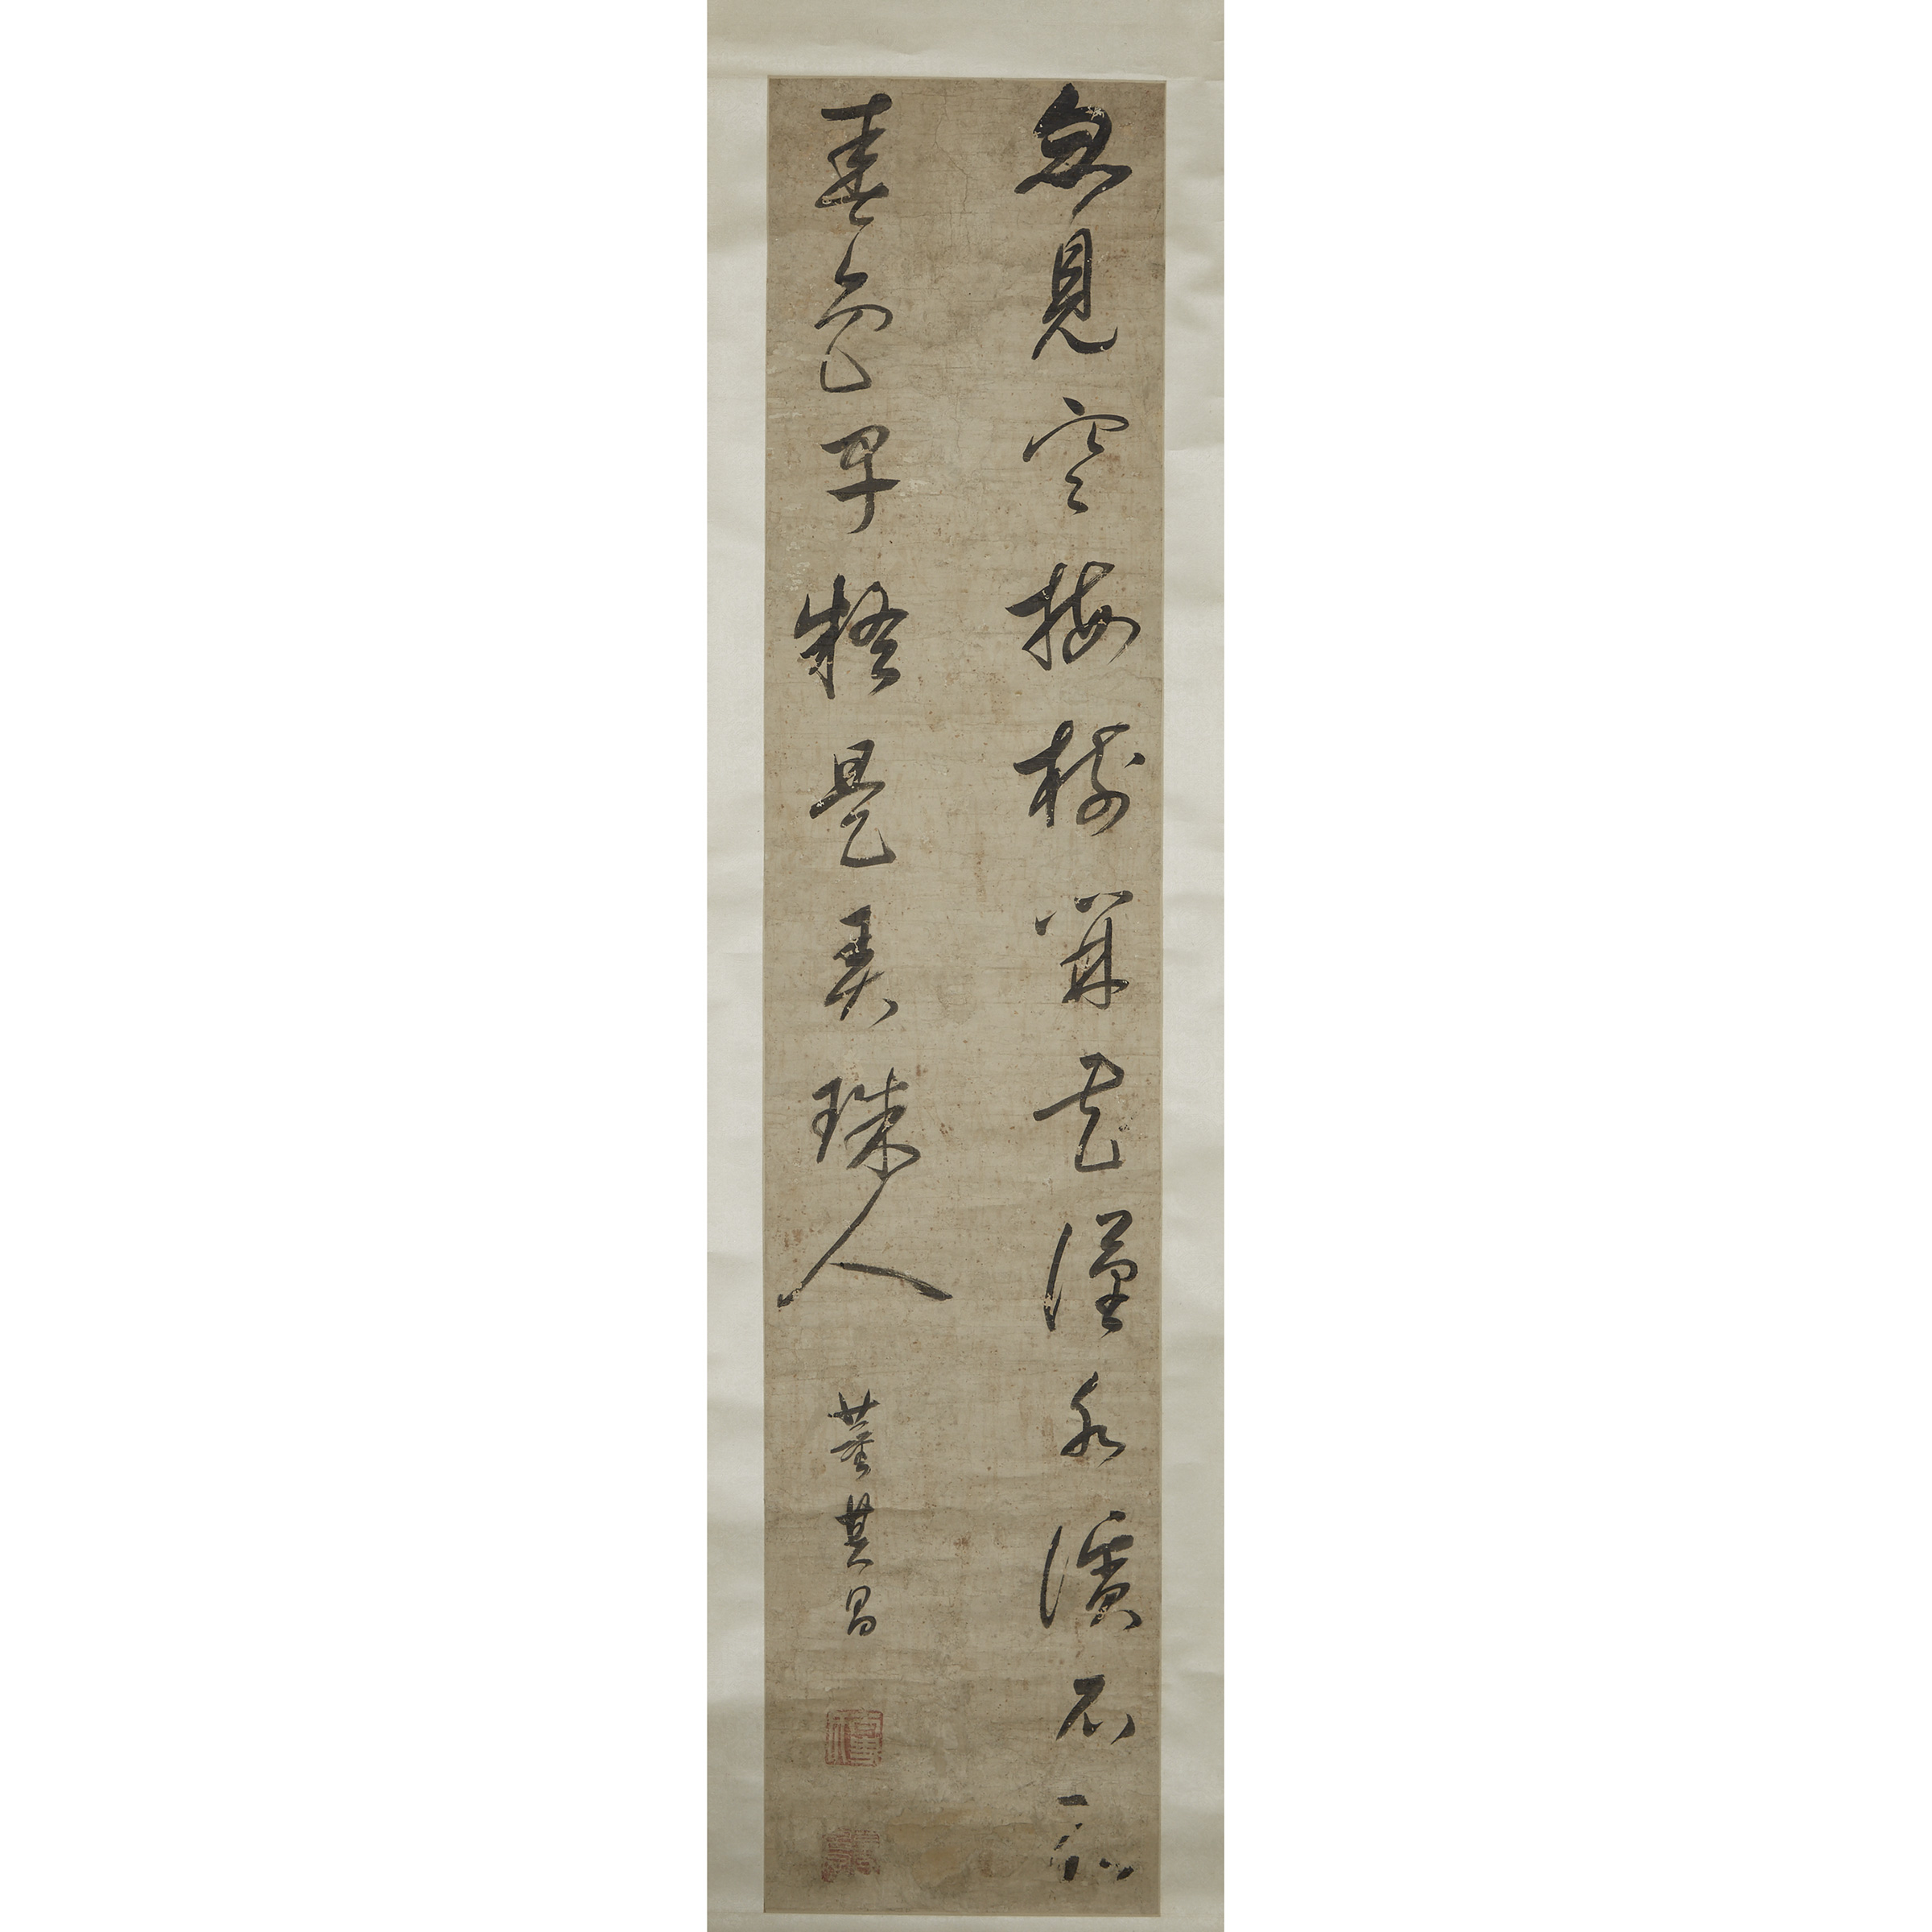 Attributed to Dong Qichang (1555-1636), Calligraphy